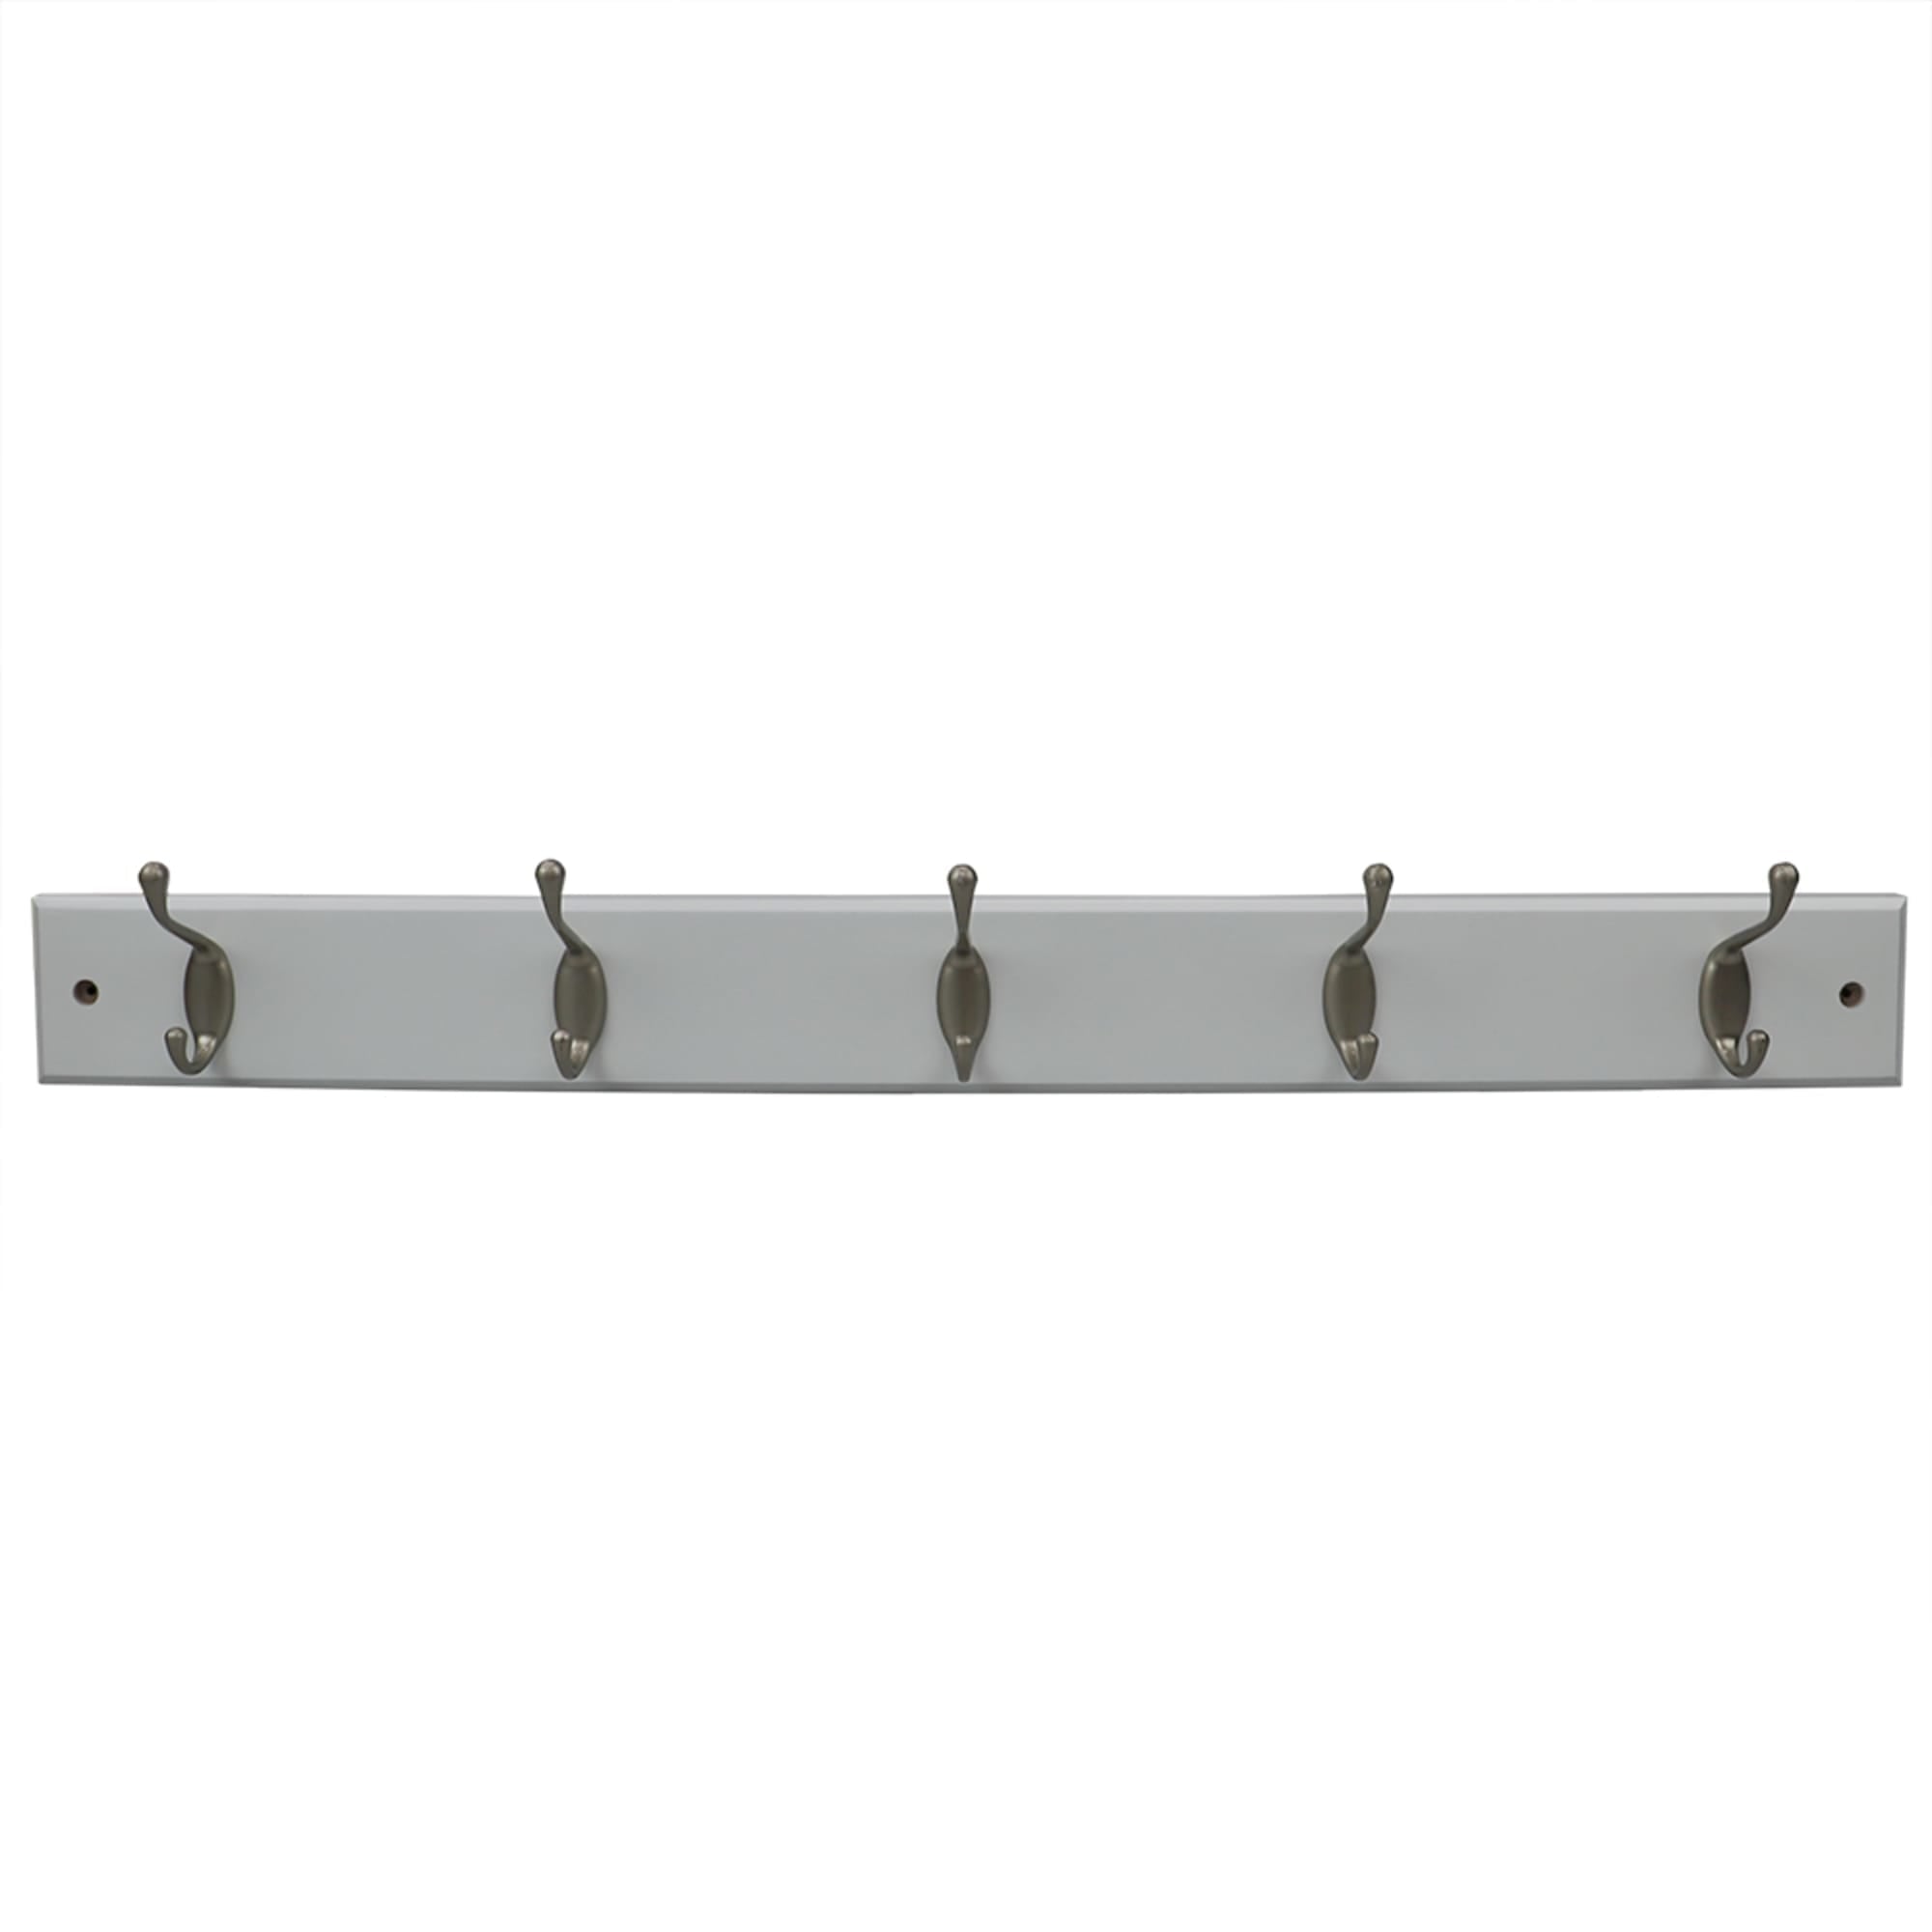 Home Basics 5 Double Hook Wall Mounted Hanging Rack, White $12.00 EACH, CASE PACK OF 12